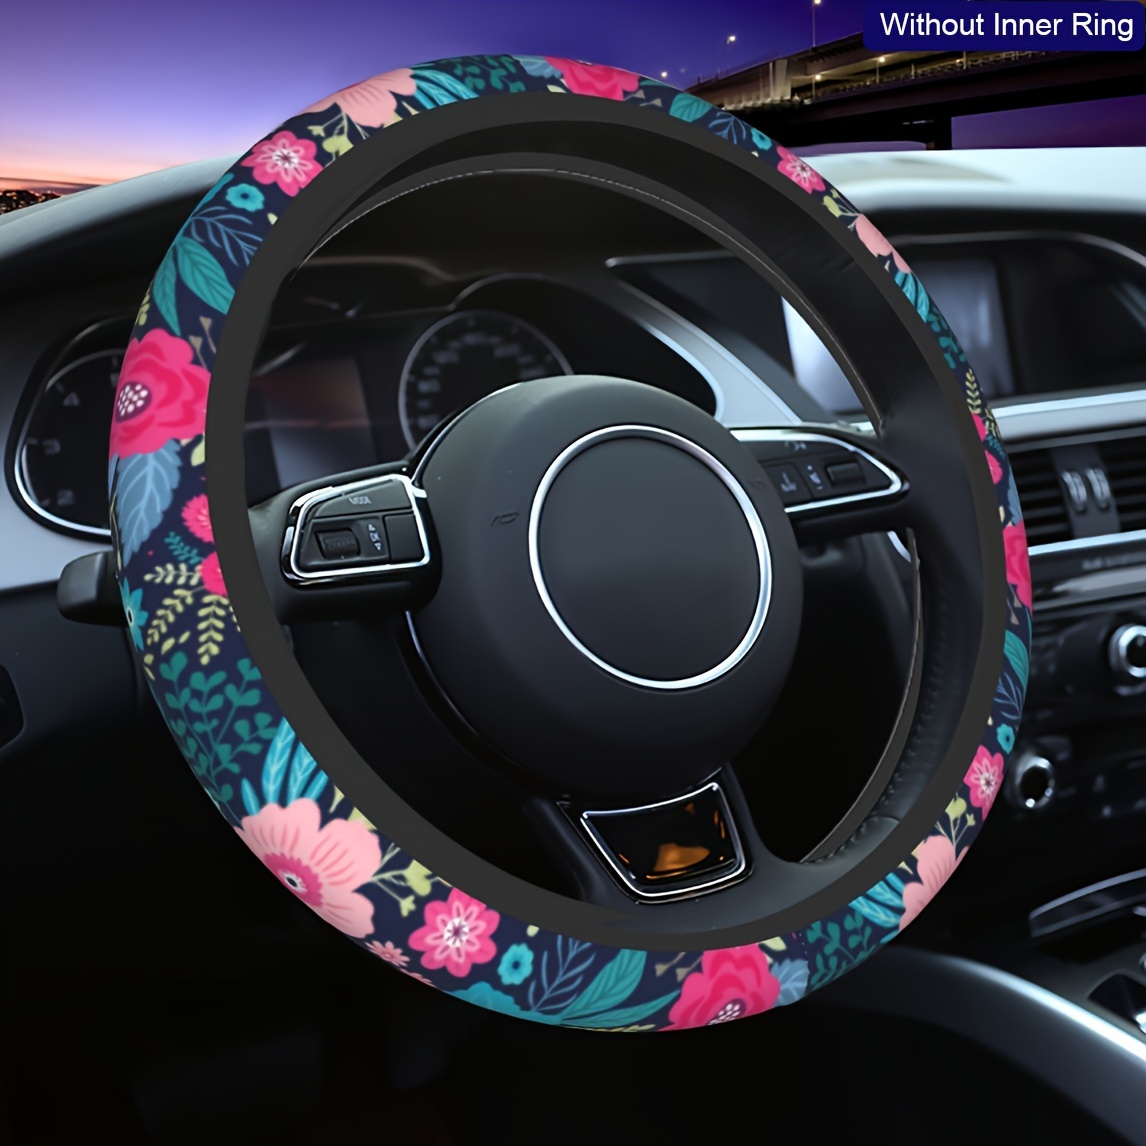 

Beauty Flowers Pattern Car Steering Wheel Cover - Universal 15 Inch Anti-slip Car Steering Wheel Protector Cover, Car Interior Accessories Decor For Women